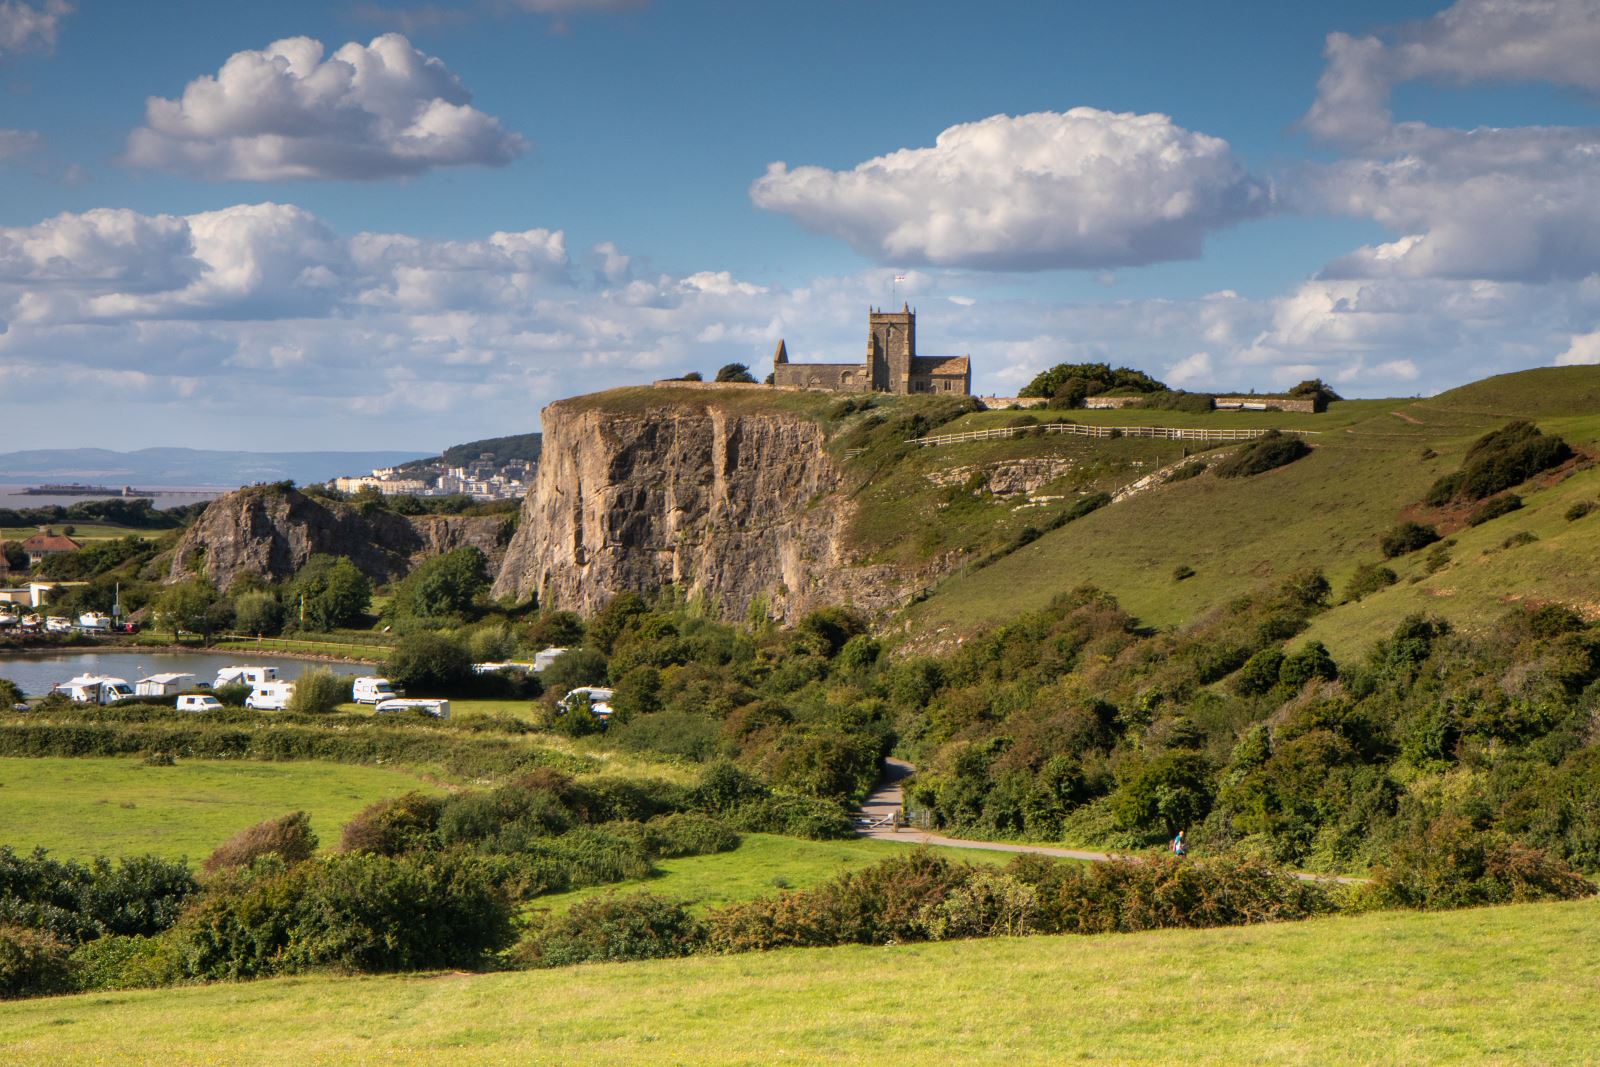 View across green fields to cliffs with a church on top